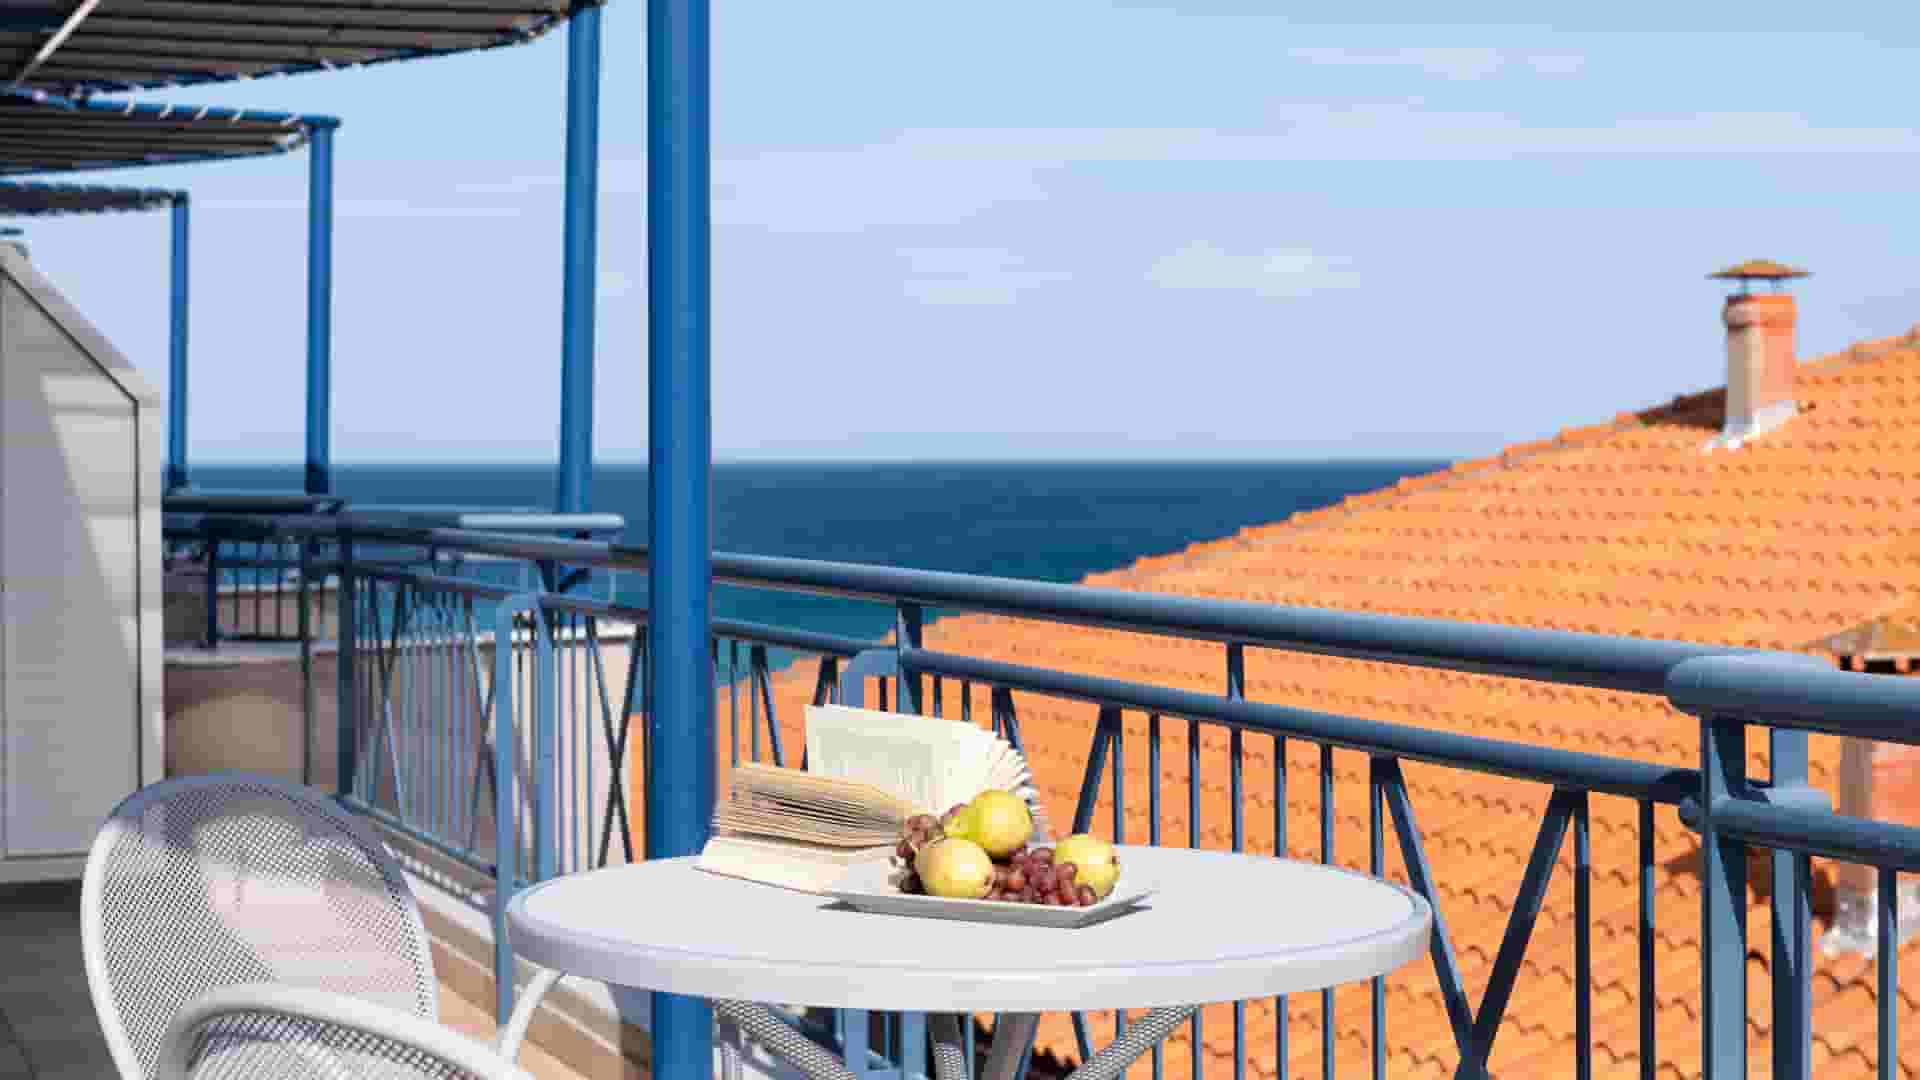 a table with food on it on a balcony overlooking the ocean